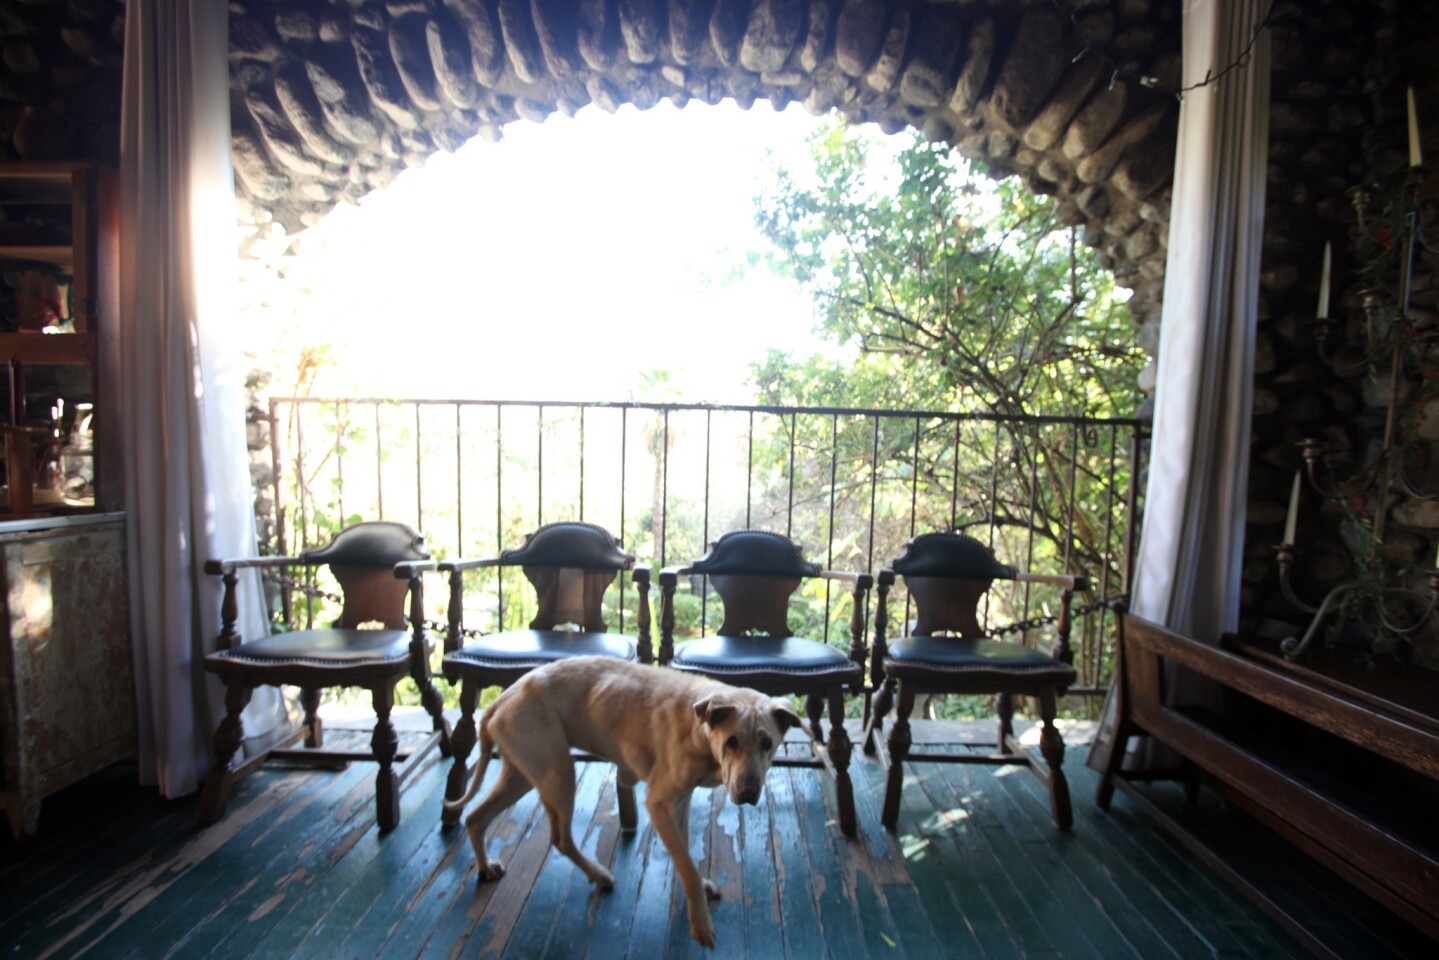 Framed by a stone arch lining the front porch, the family's17-year-old Shar-Pei and Lab mix, Lucy, seems the perfect fixture for the 1904 Arts and Crafts house.